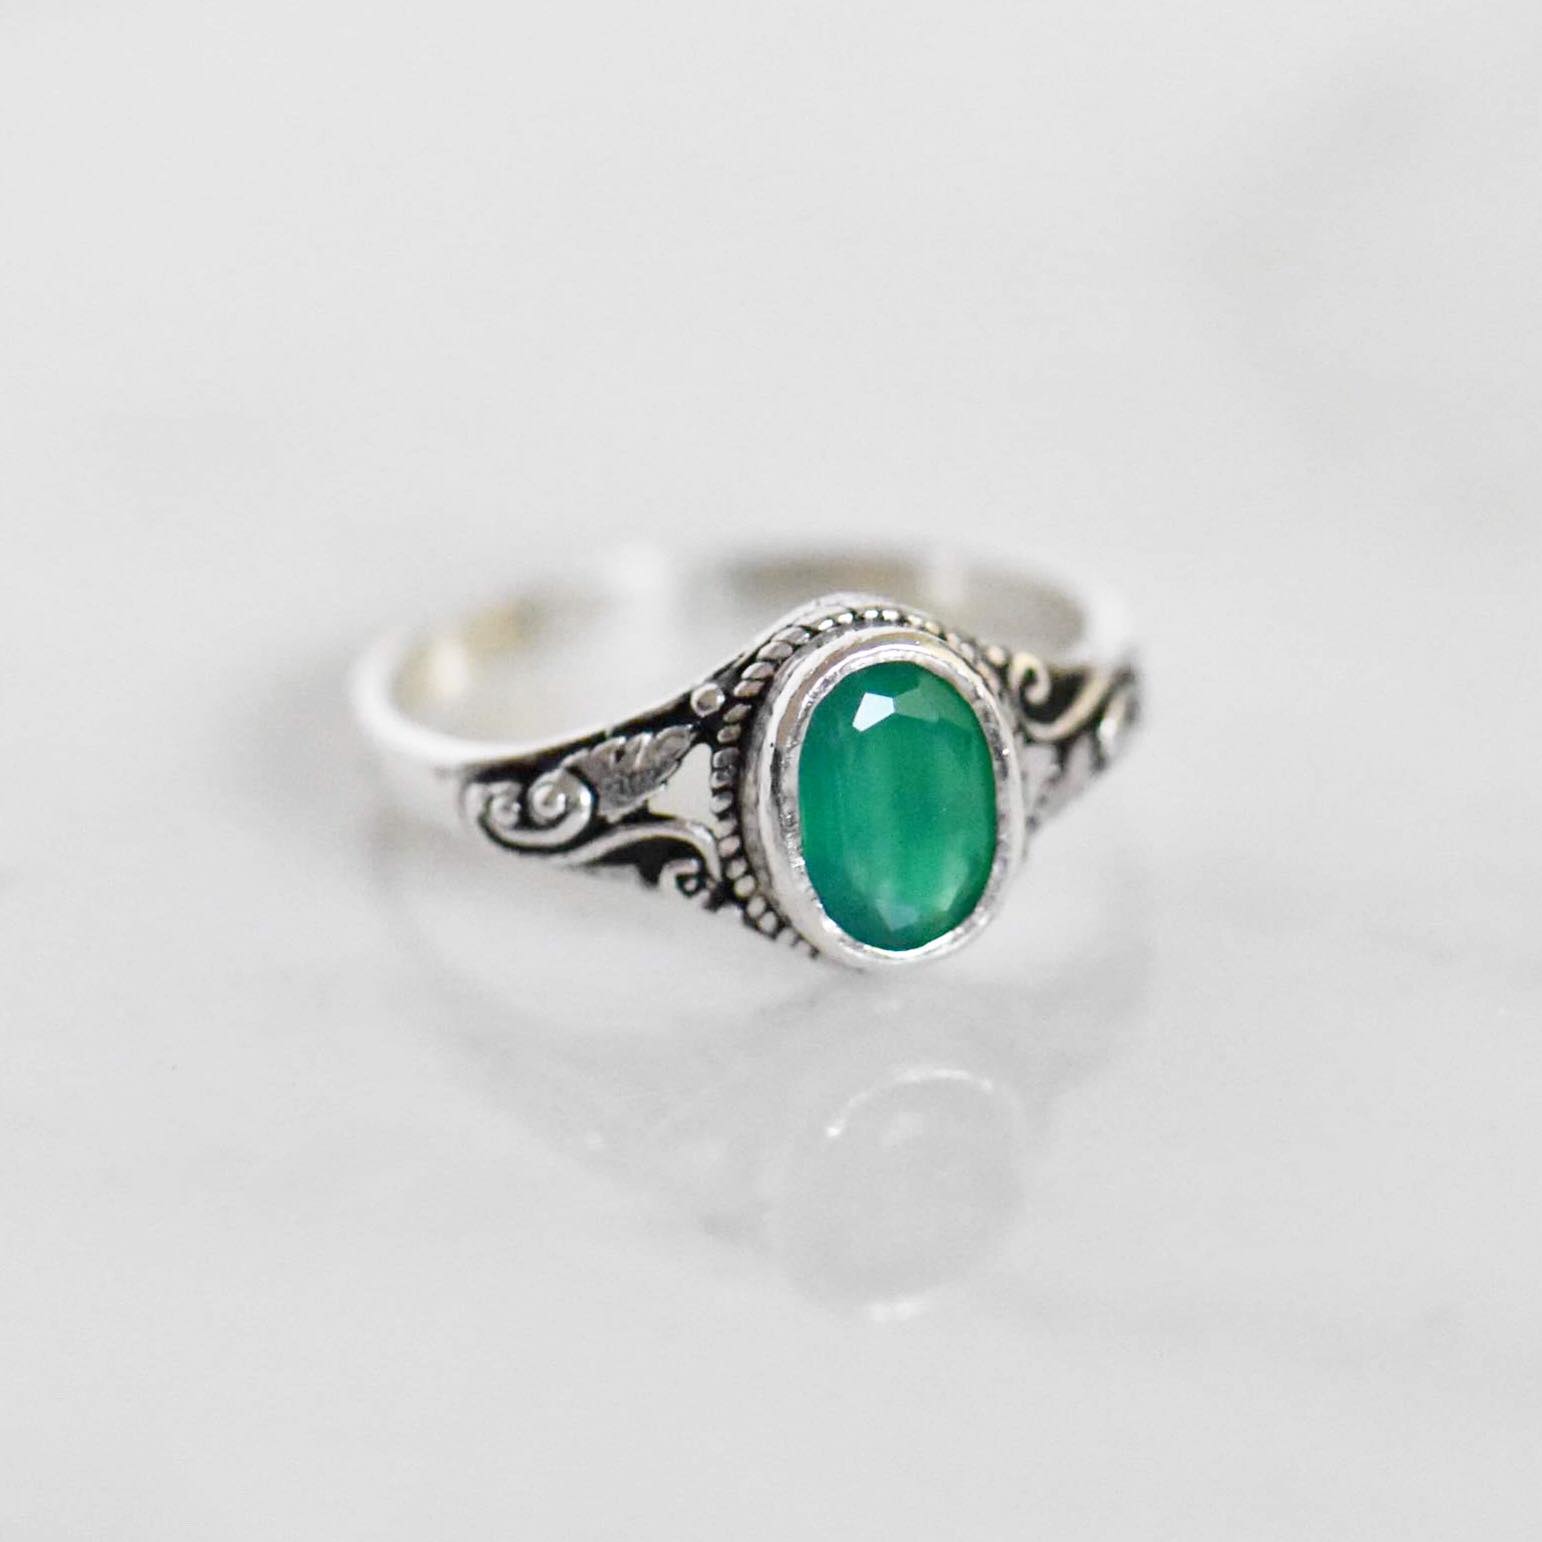 Sterling Silver Om Oval Cabochon Green Onyx Mens Yoga Ring 